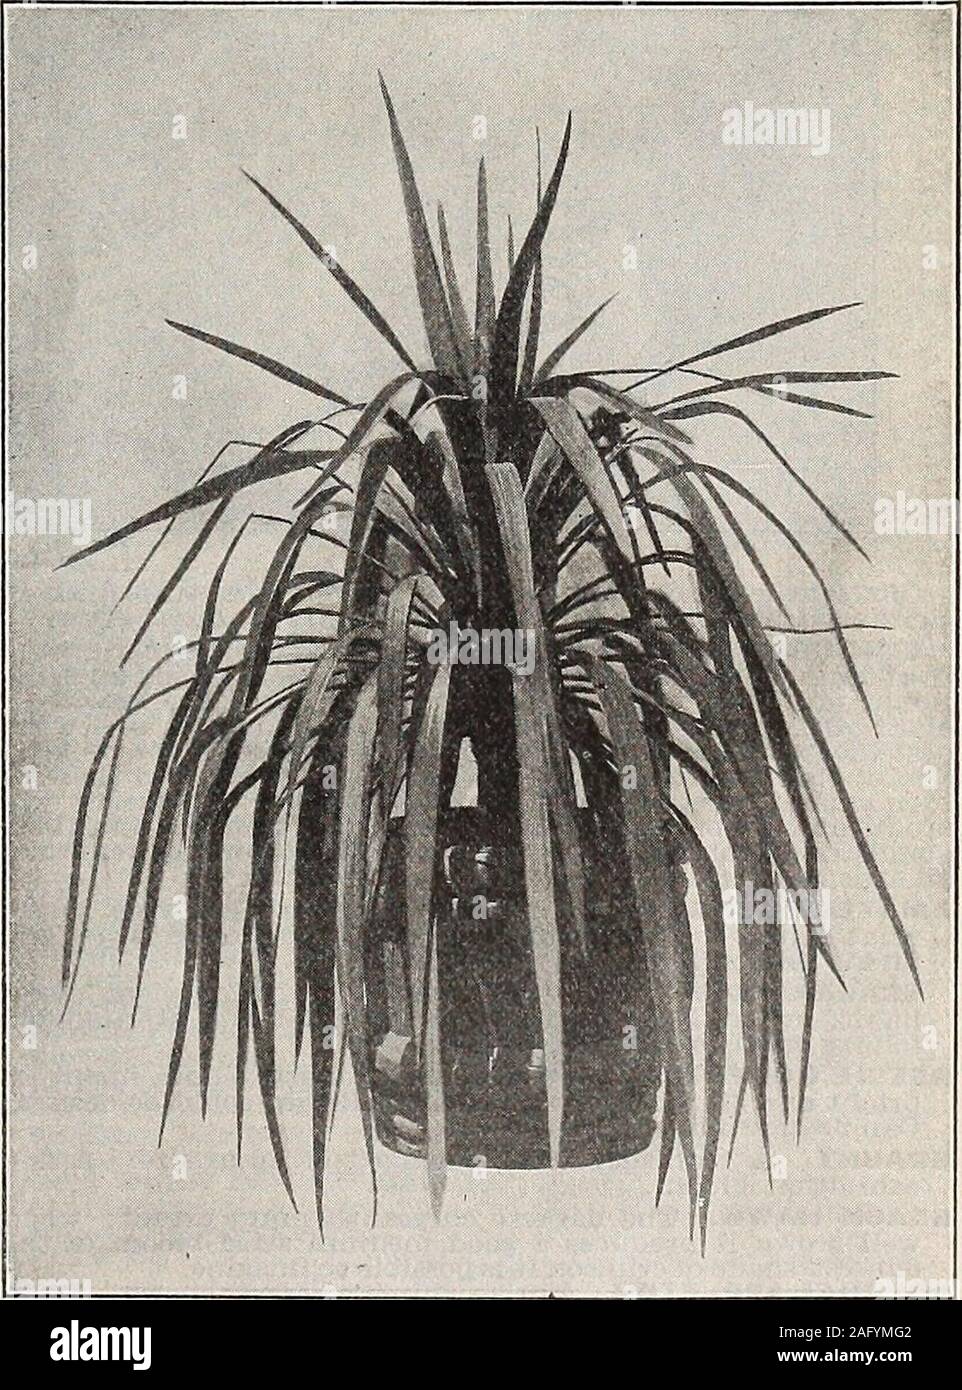 . Germain : [catalog]. CHAMAEROPS HUMILIS. YUCCA GLAUCA PENDULAYUCCA GLAUCA PENDULA. A very decorative plant for porchdecoration. Its head of glauca green leaves with fountain-likeappearance gives it a tropical effect. In gallon cans 35 cents to75 cents each; 5 gallon cans V2 to ZV2 ft. $1.50 each; in 12 inchJapanese tub (as per cut) $3.00 each; $5.00 per pair. [85] CHRYSANTHEMUMS Stock Photo